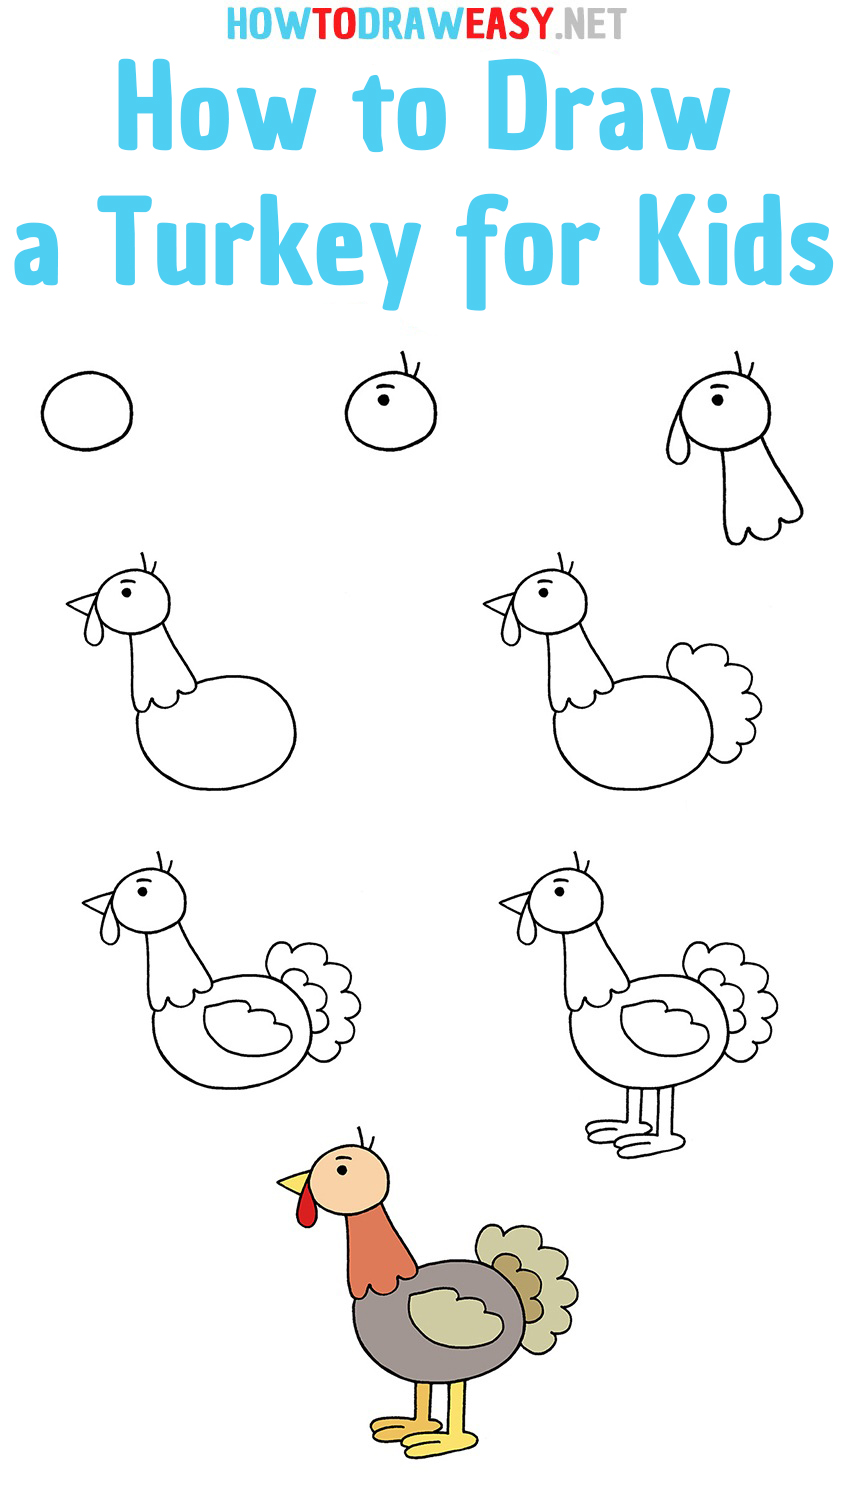 How to Draw a Turkey for Kids step by step